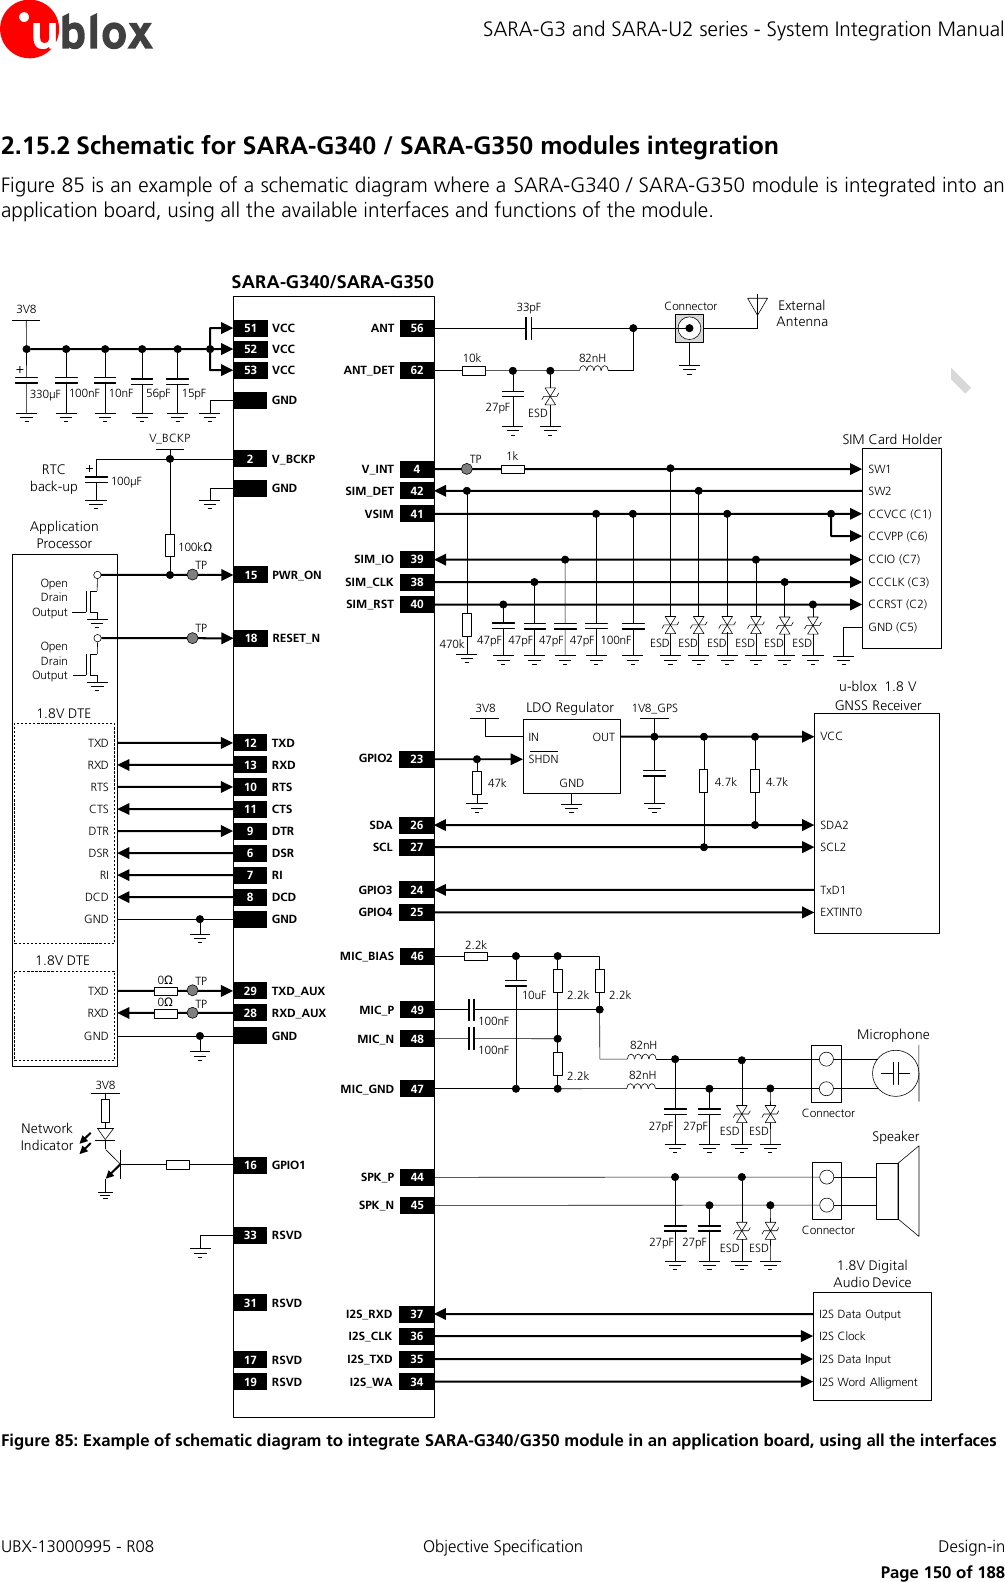 SARA-G3 and SARA-U2 series - System Integration Manual UBX-13000995 - R08  Objective Specification  Design-in     Page 150 of 188 2.15.2 Schematic for SARA-G340 / SARA-G350 modules integration Figure 85 is an example of a schematic diagram where a SARA-G340 / SARA-G350 module is integrated into an application board, using all the available interfaces and functions of the module.  TXDRXDRTSCTSDTRDSRRIDCDGND12 TXD9DTR13 RXD10 RTS11 CTS6DSR7RI8DCDGND3V8GND330µF 10nF100nF 56pFSARA-G340/SARA-G35052 VCC53 VCC51 VCC+100µF2V_BCKPGND GNDGNDRTC back-up1.8V DTE1.8V DTE16 GPIO13V8Network Indicator18 RESET_NApplication ProcessorOpen Drain Output15 PWR_ON100kΩOpen Drain OutputTXDRXD29 TXD_AUX28 RXD_AUX0Ω0ΩTPTPu-blox  1.8 V GNSS Receiver4.7kOUTINGNDLDO RegulatorSHDNSDASCL4.7k3V8 1V8_GPSSDA2SCL2GPIO3GPIO4TxD1EXTINT02627242547kVCCGPIO2 231.8V Digital Audio DeviceI2S_RXDI2S_CLKI2S Data OutputI2S ClockI2S_TXDI2S_WAI2S Data InputI2S Word  Alligment3736353449MIC_P2.2k2.2k 2.2k48MIC_N2.2k10uF46MIC_BIAS47MIC_GND100nF100nF44SPK_P45SPK_N82nH82nH27pF27pFConnectorMicrophoneESDESD27pF 27pFSpeakerConnectorESD ESD15pF33 RSVD31 RSVD17 RSVD19 RSVD47pFSIM Card HolderCCVCC (C1)CCVPP (C6)CCIO (C7)CCCLK (C3)CCRST (C2)GND (C5)47pF 47pF 100nF41VSIM39SIM_IO38SIM_CLK40SIM_RST47pFSW1 SW24V_INT42SIM_DET470k ESD ESD ESD ESD ESD ESD56ANT62ANT_DET10k 82nH33pF Connector27pF ESDExternal AntennaV_BCKP1kTPTPTP Figure 85: Example of schematic diagram to integrate SARA-G340/G350 module in an application board, using all the interfaces  